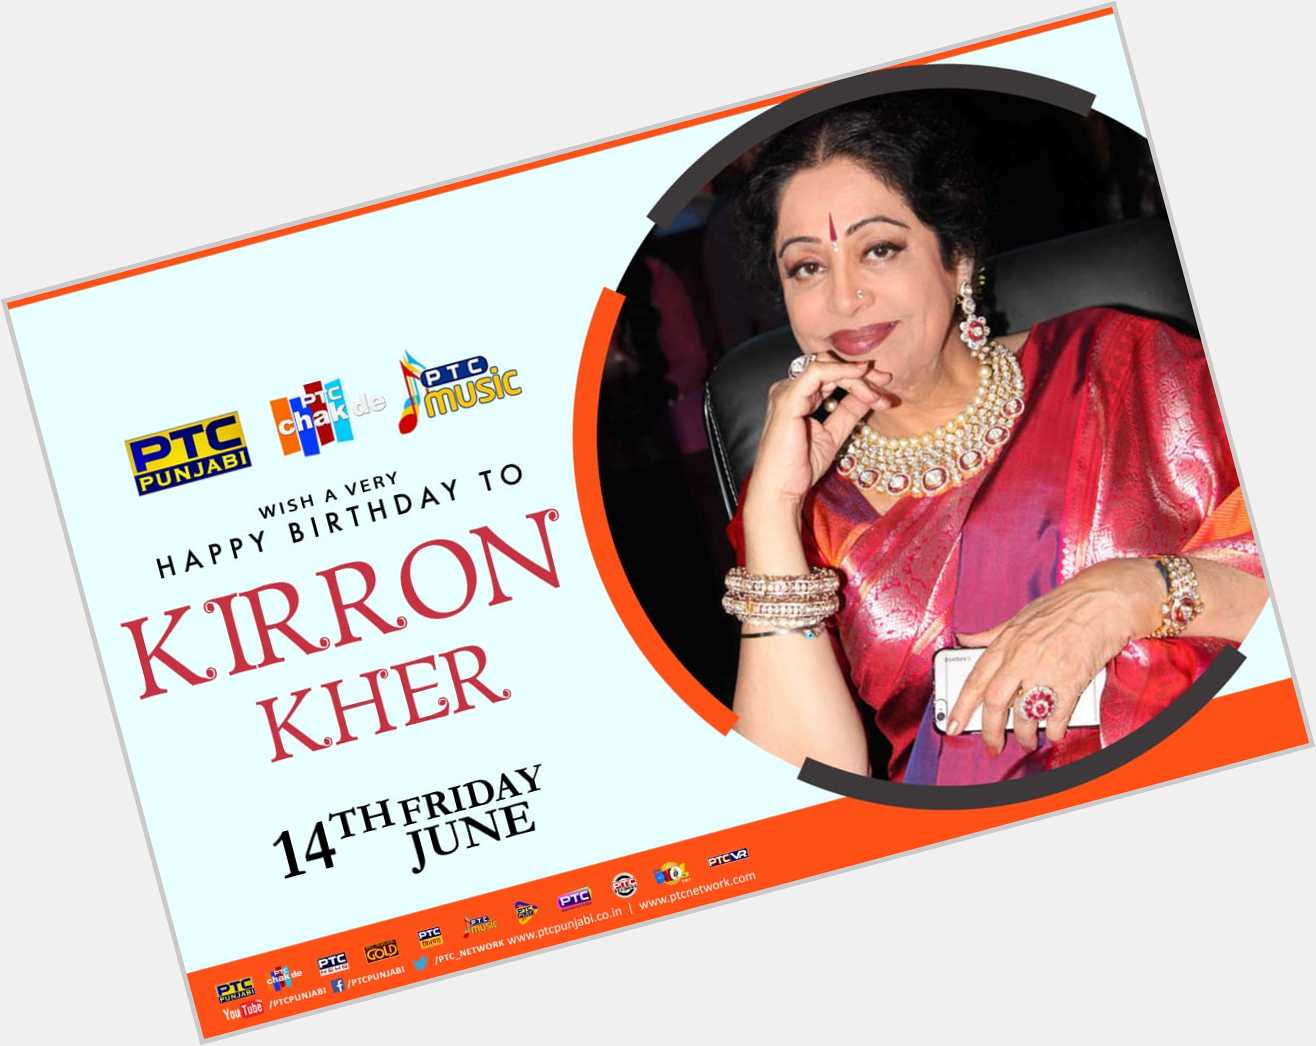 PTC Network wishes Kirron Kher very happy birthday and a great life ahead.   